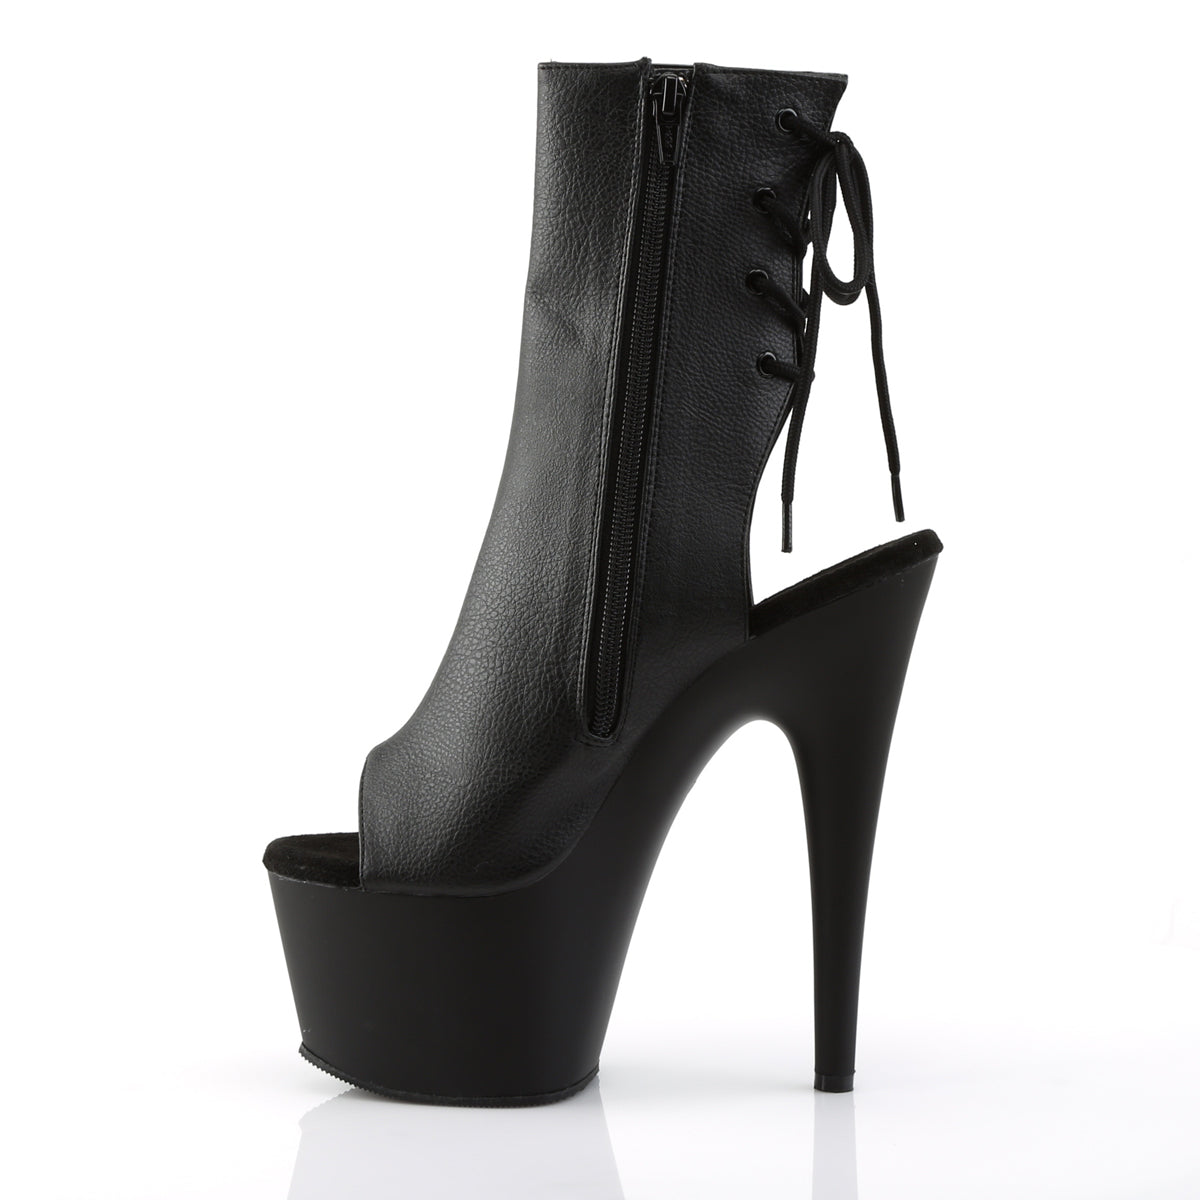 ADORE-1018 Pleasers 7 Inch Heel Black Strippers Ankle Boots-Pleaser- Sexy Shoes Pole Dance Heels